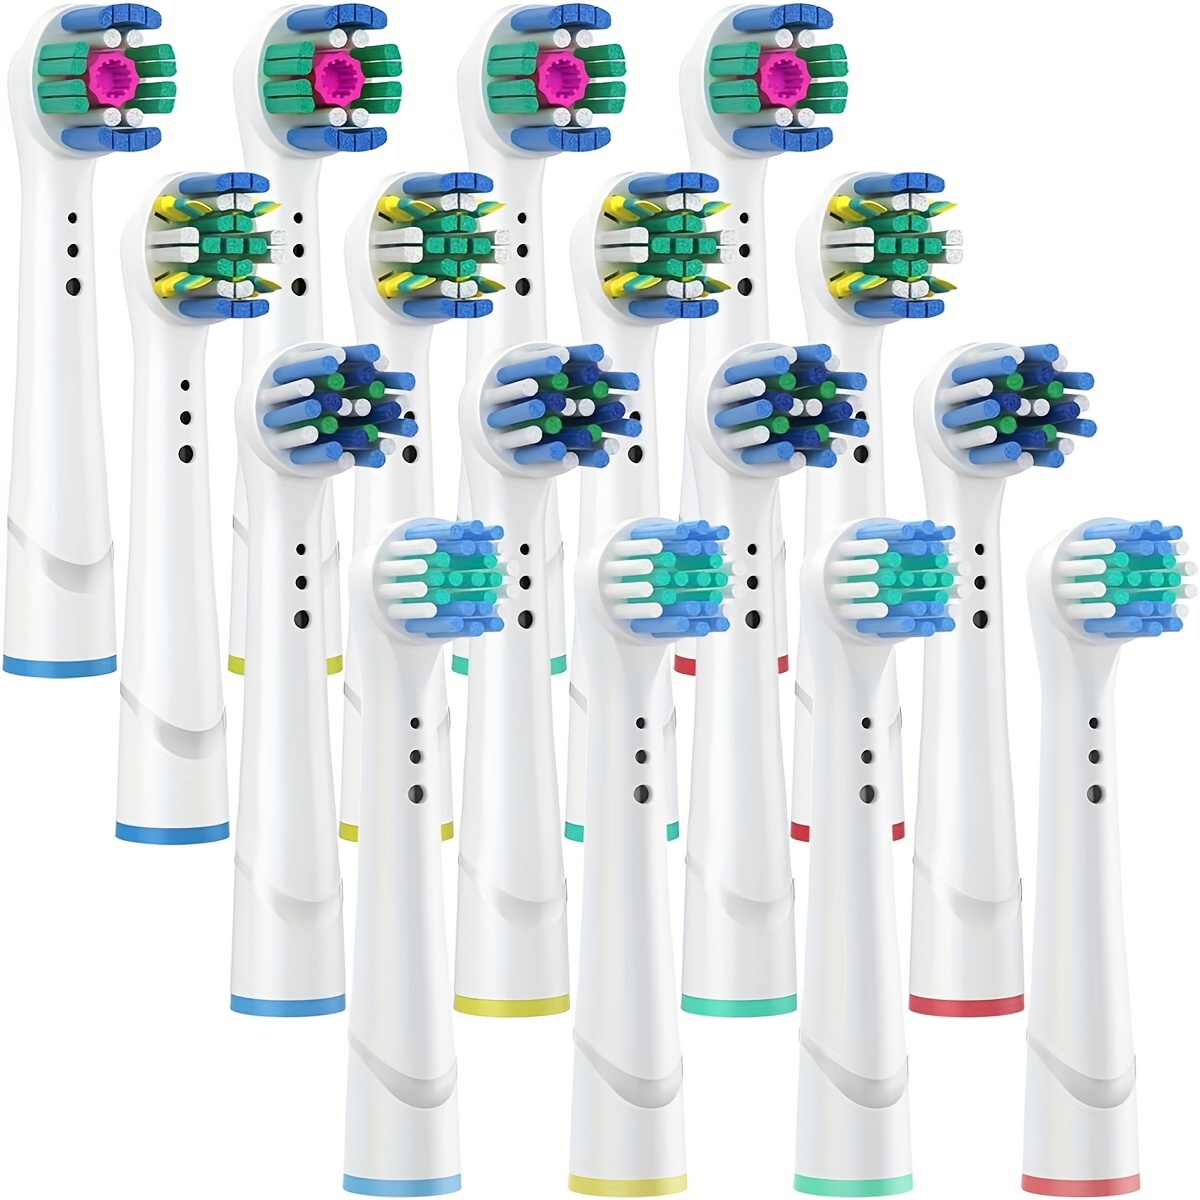 

4/12/16 Pcs Replacement Toothbrush Heads, Professionalelectric Toothbrush Heads, Brush Heads Suitable For Oral B Replacementheads Refill 500/1000/1500/3000/3757/5000/7000/7500/8000